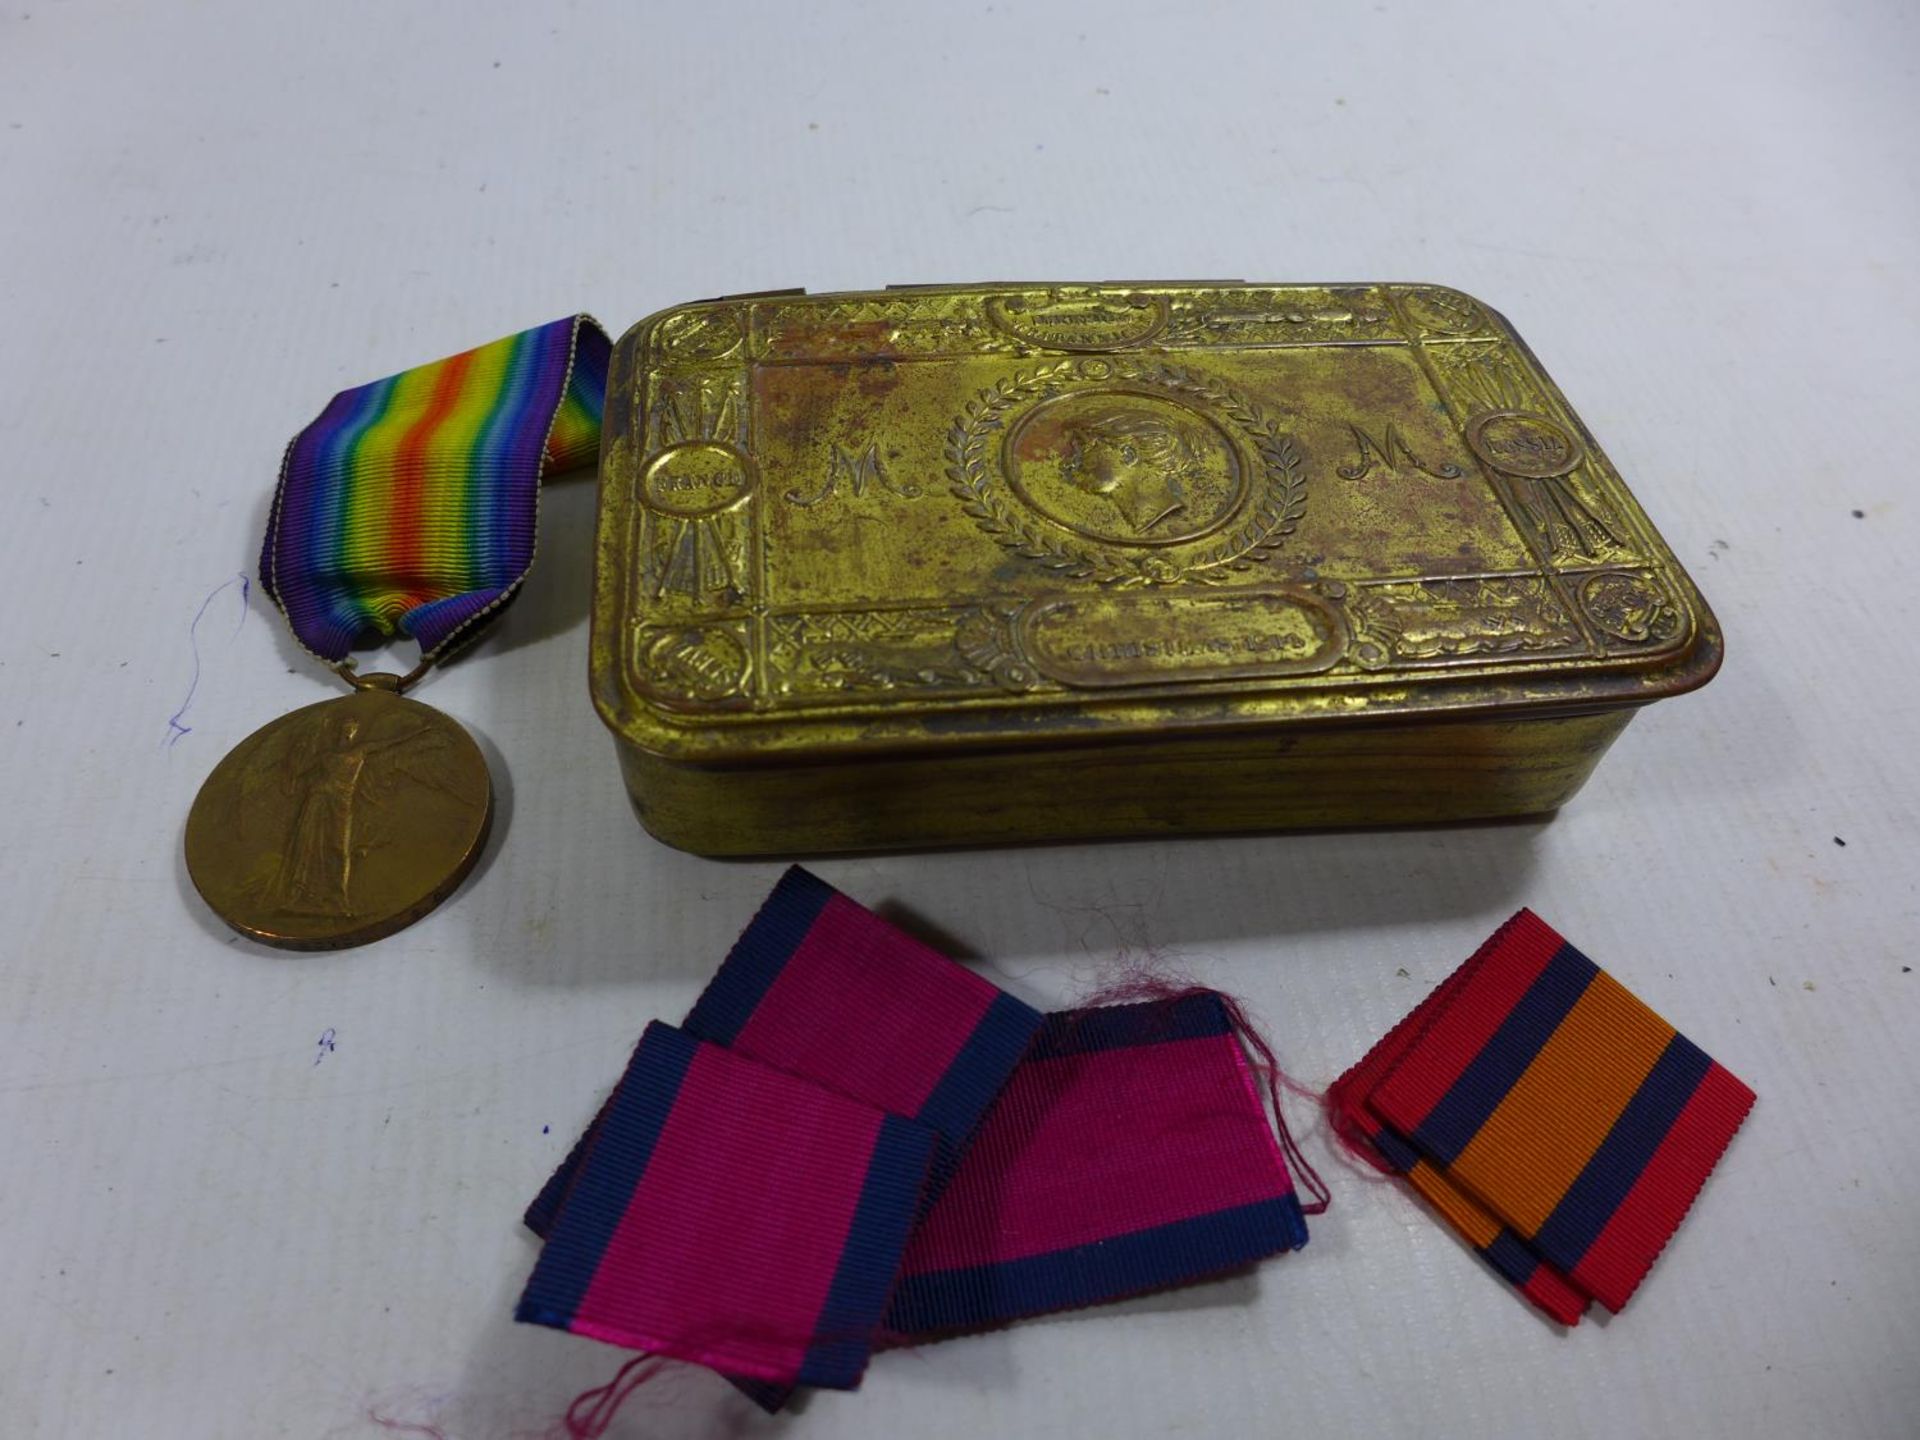 A WAR FOR CIVILISATION MEDAL AWARDED TO 11474 CORPORAL J BOYD OF THE MACHINE GUN CORPS AND A